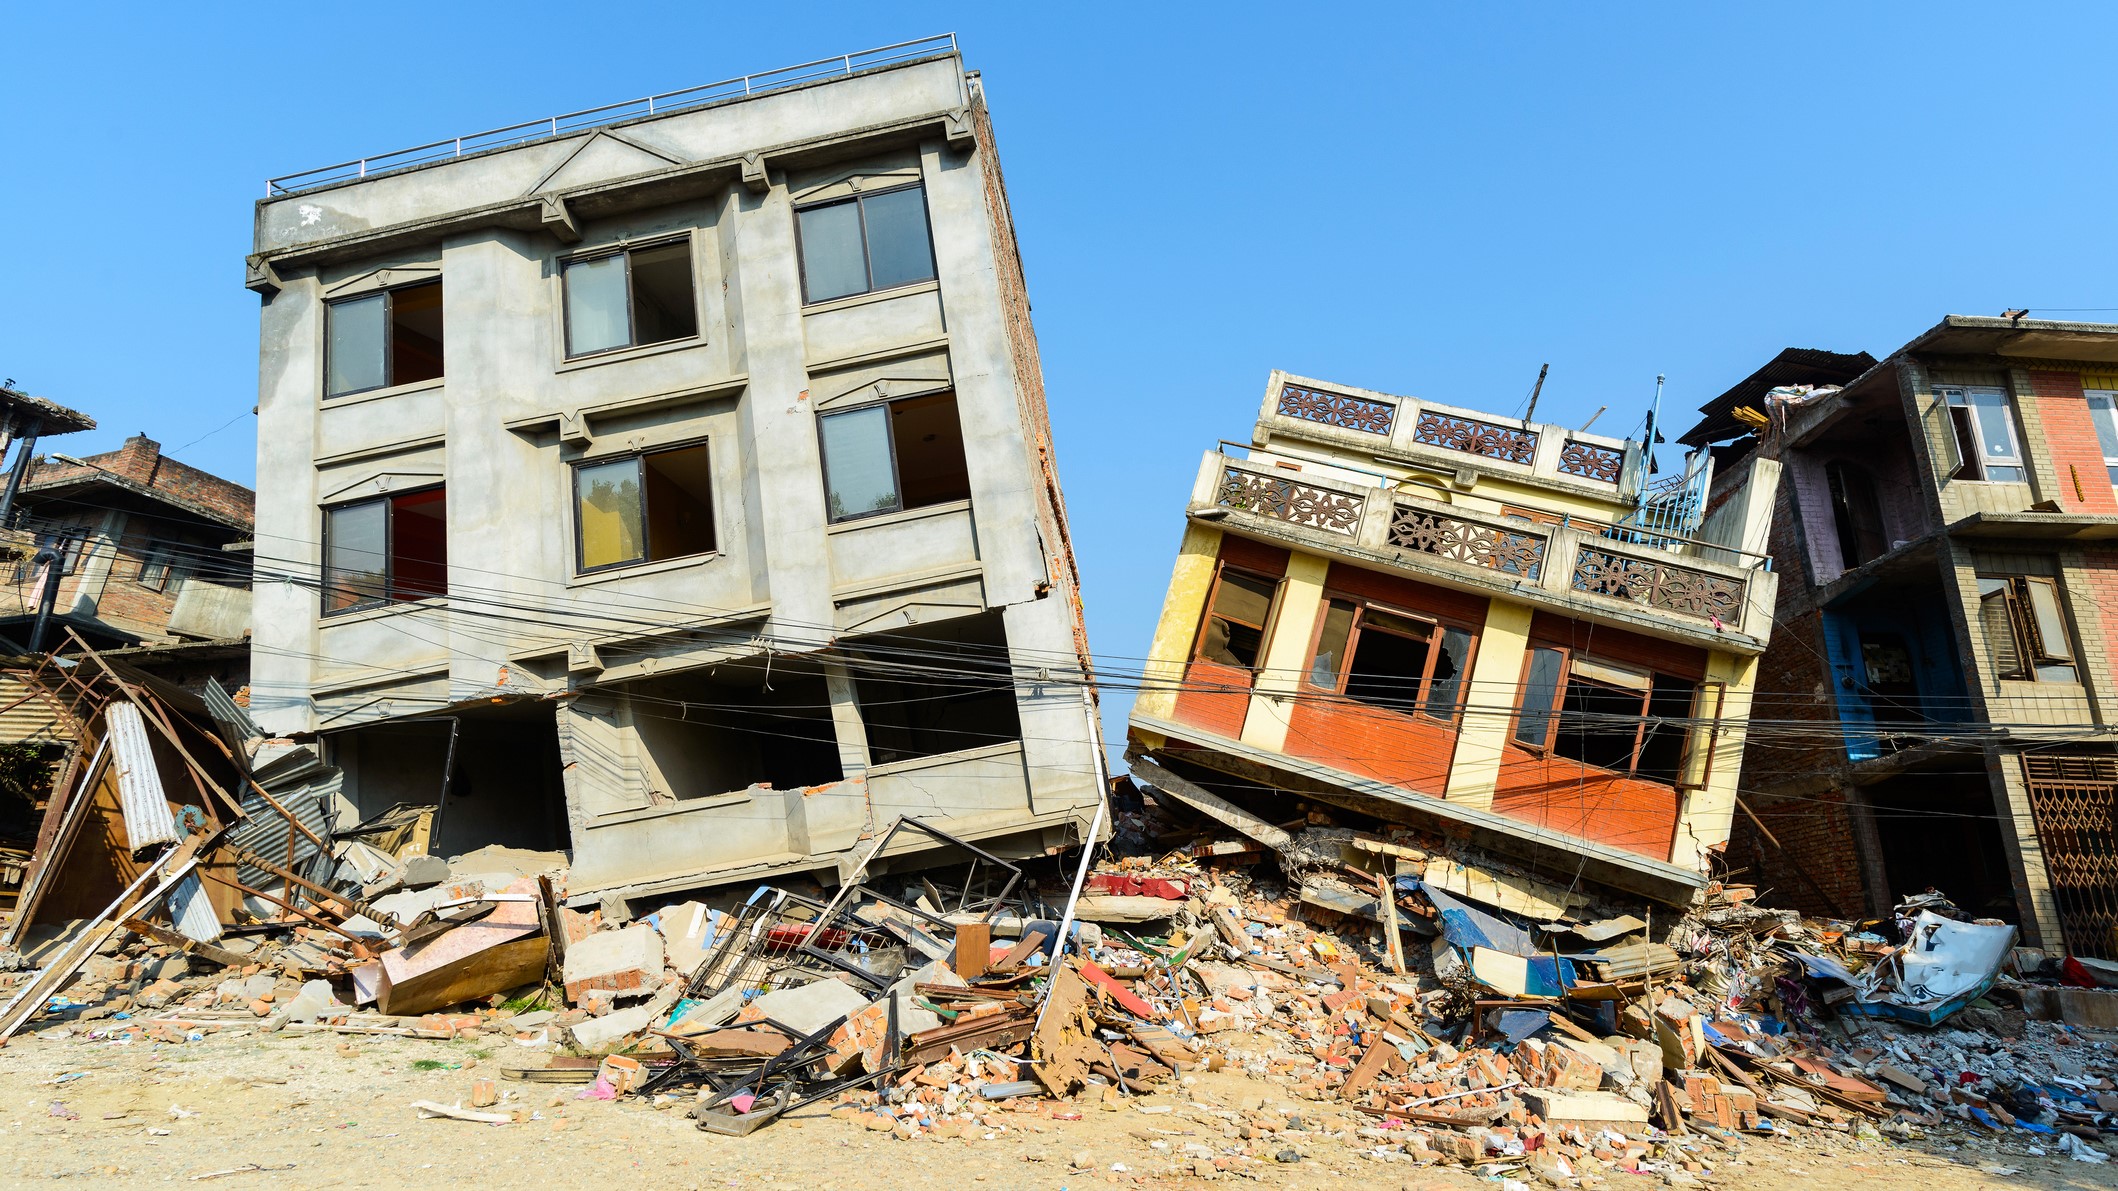 Buildings are reduced to rubble after the 2015 earthquake in Nepal.